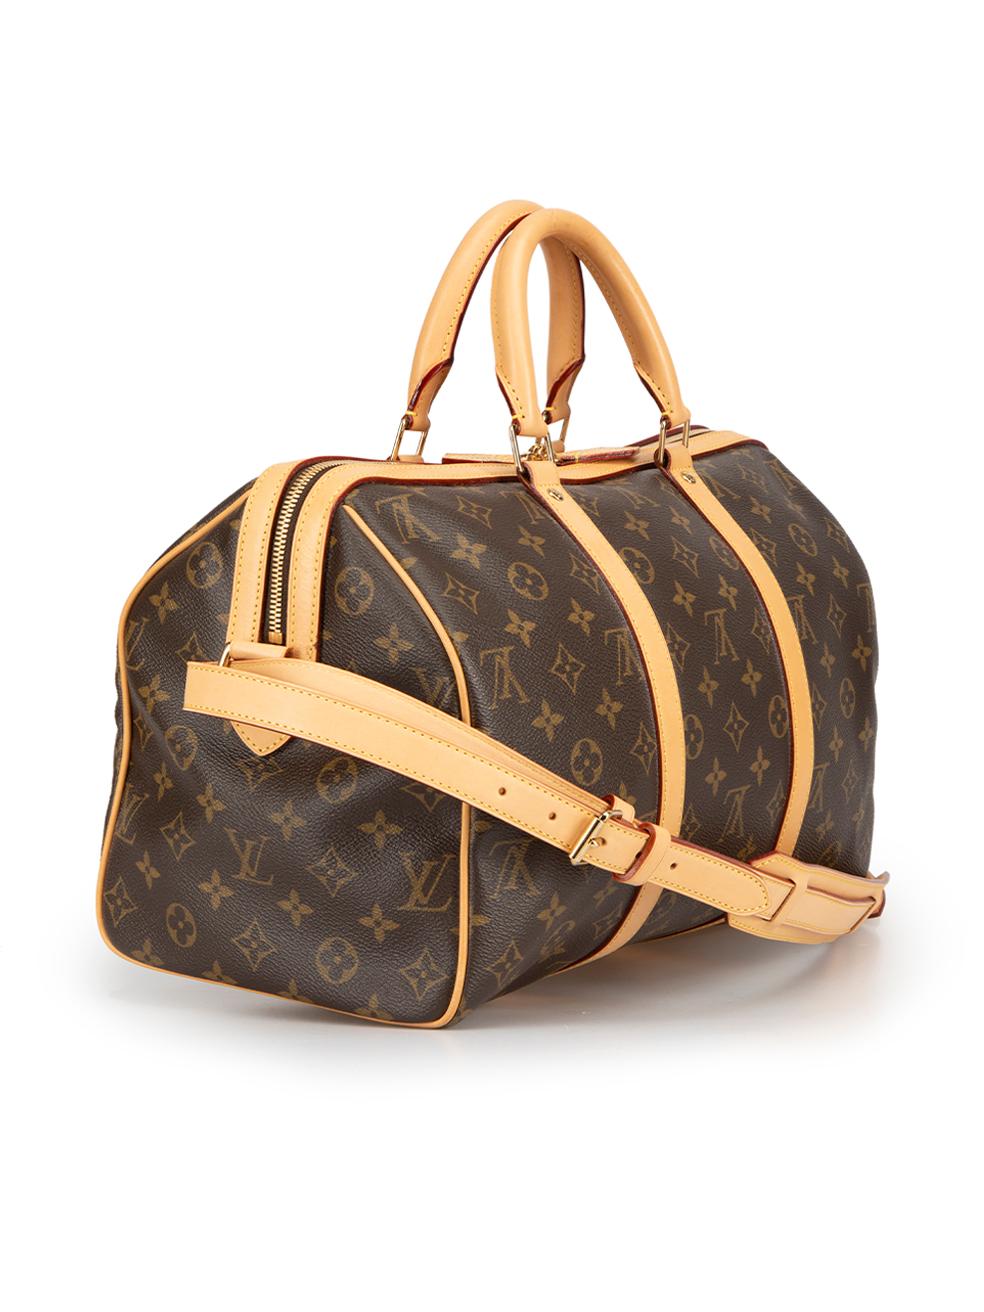 CONDITION is Very good. Minimal wear to bag is evident. Minimal wear to the base with faint scuff marks and small linear red mark to the front rounded top handle on this used Louis Vuitton designer resale item. This item comes with original dust